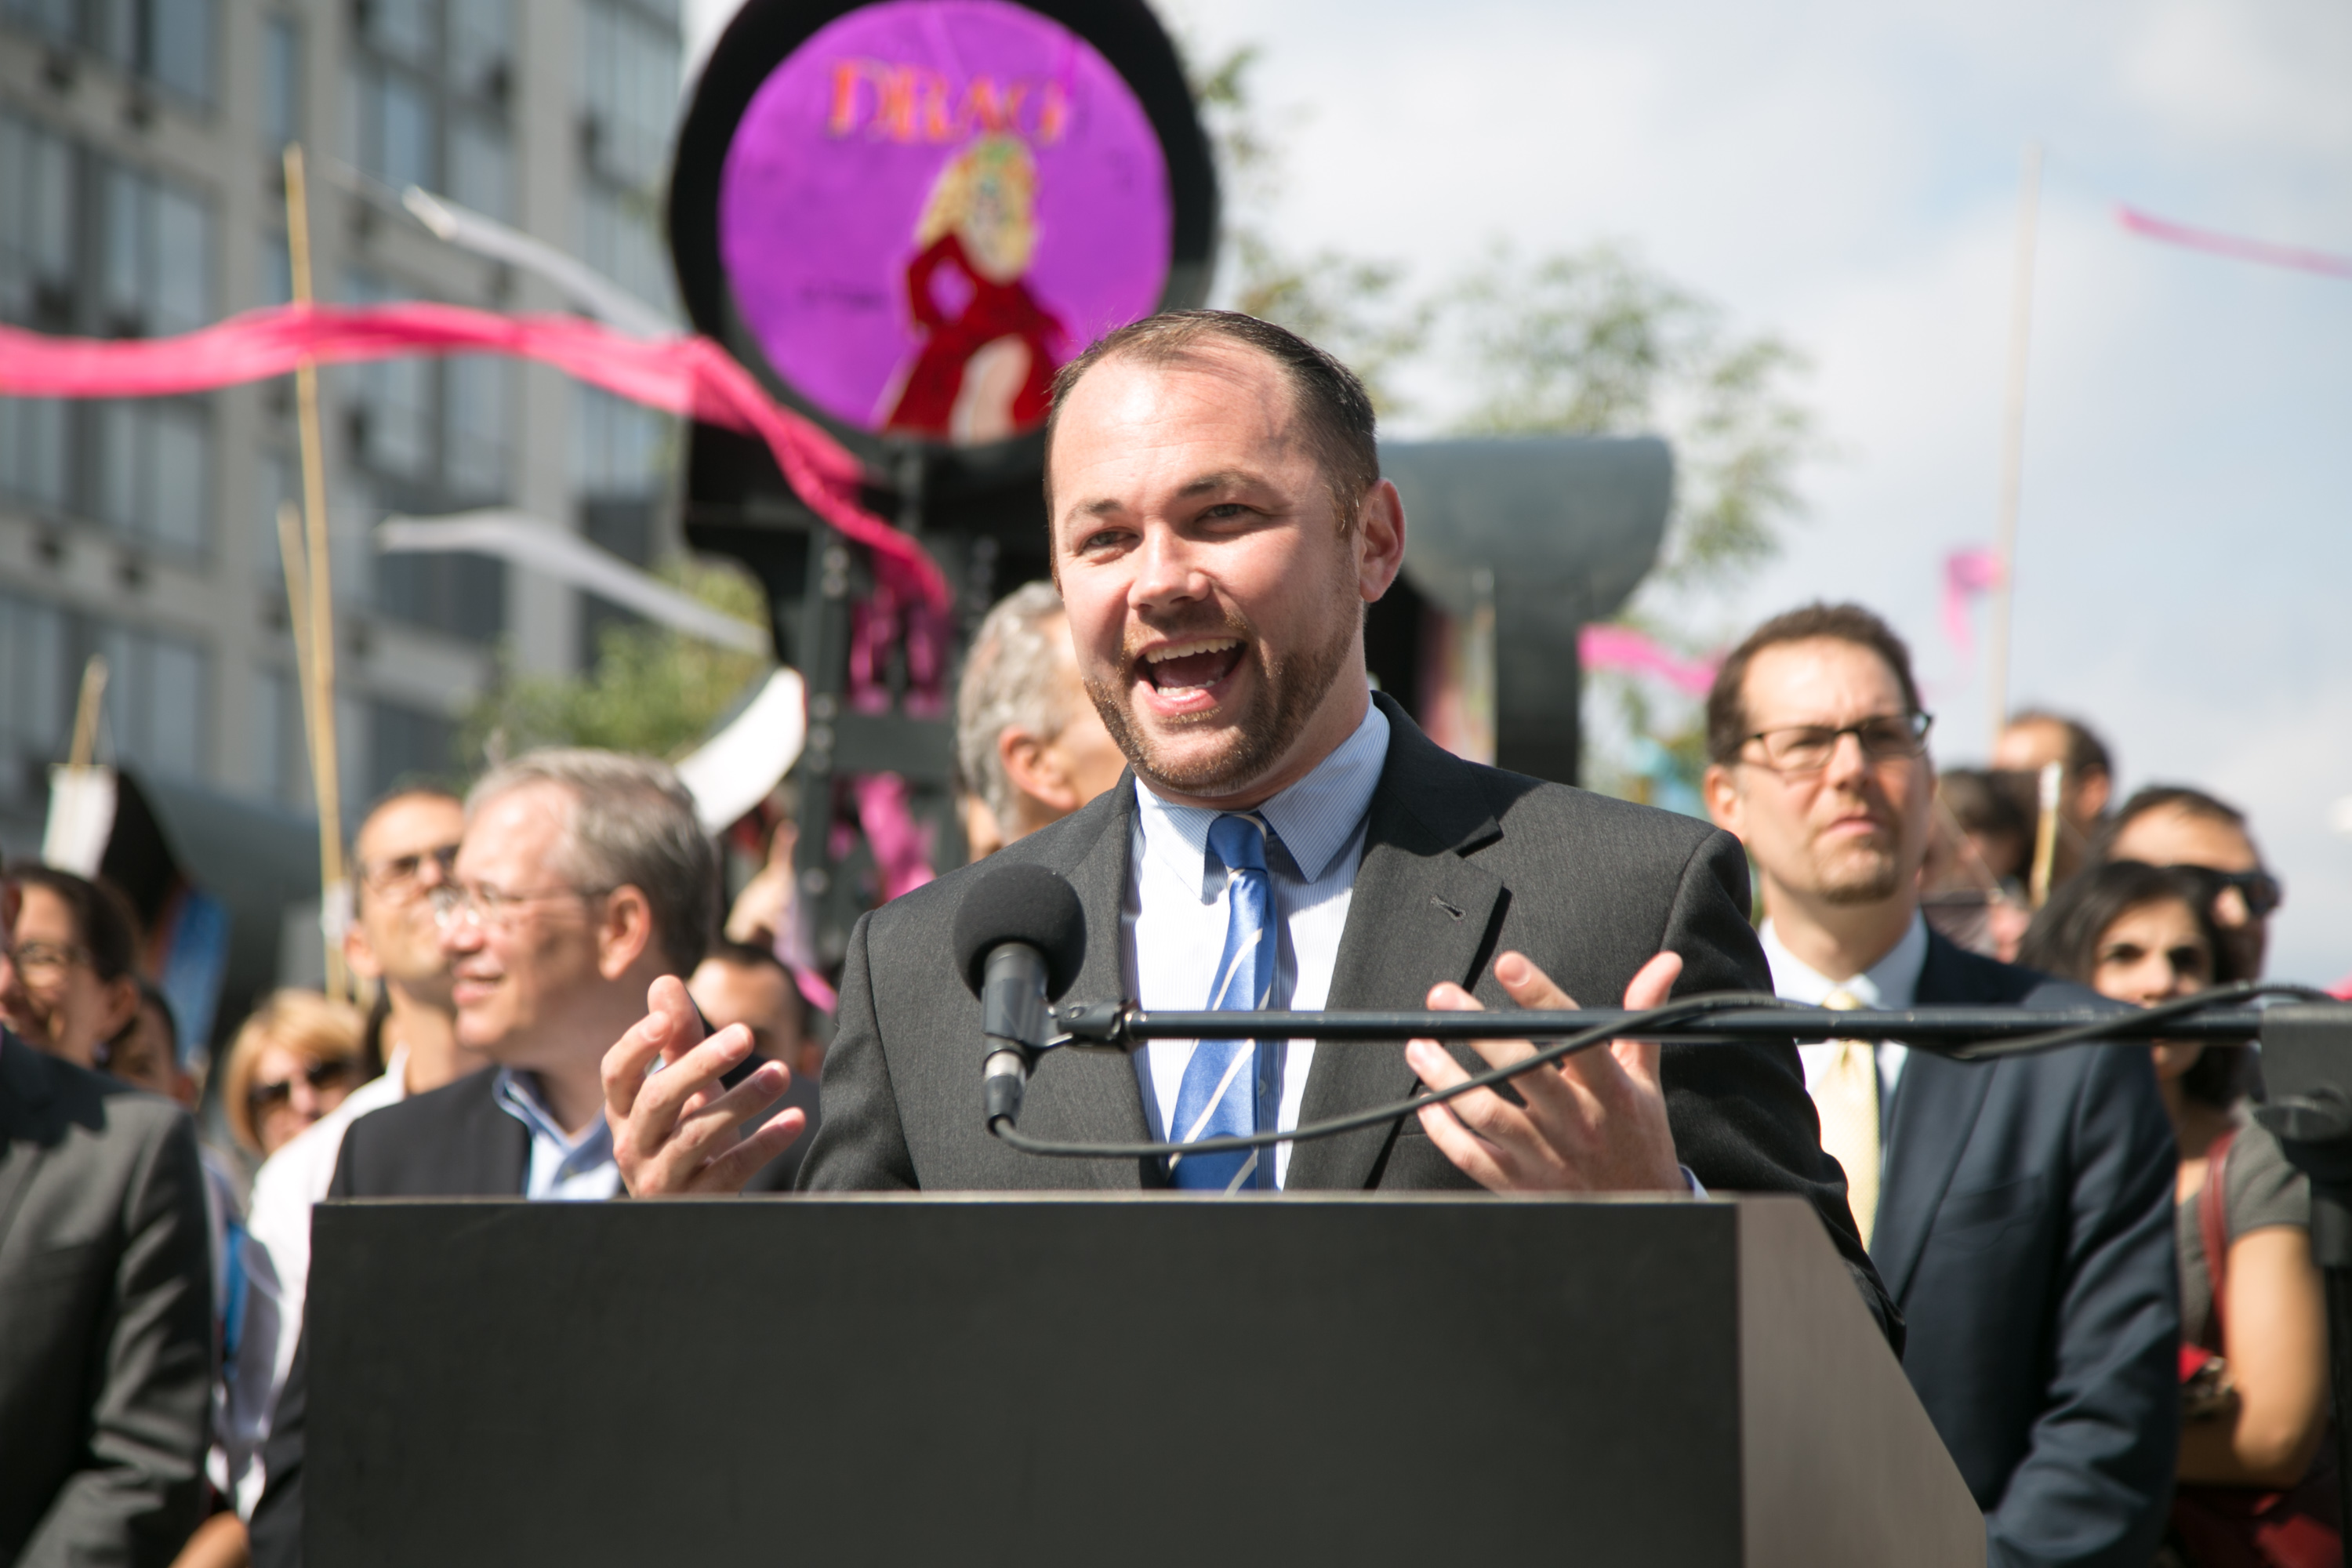 New York City council speaker Corey Johnson could run for Mayor